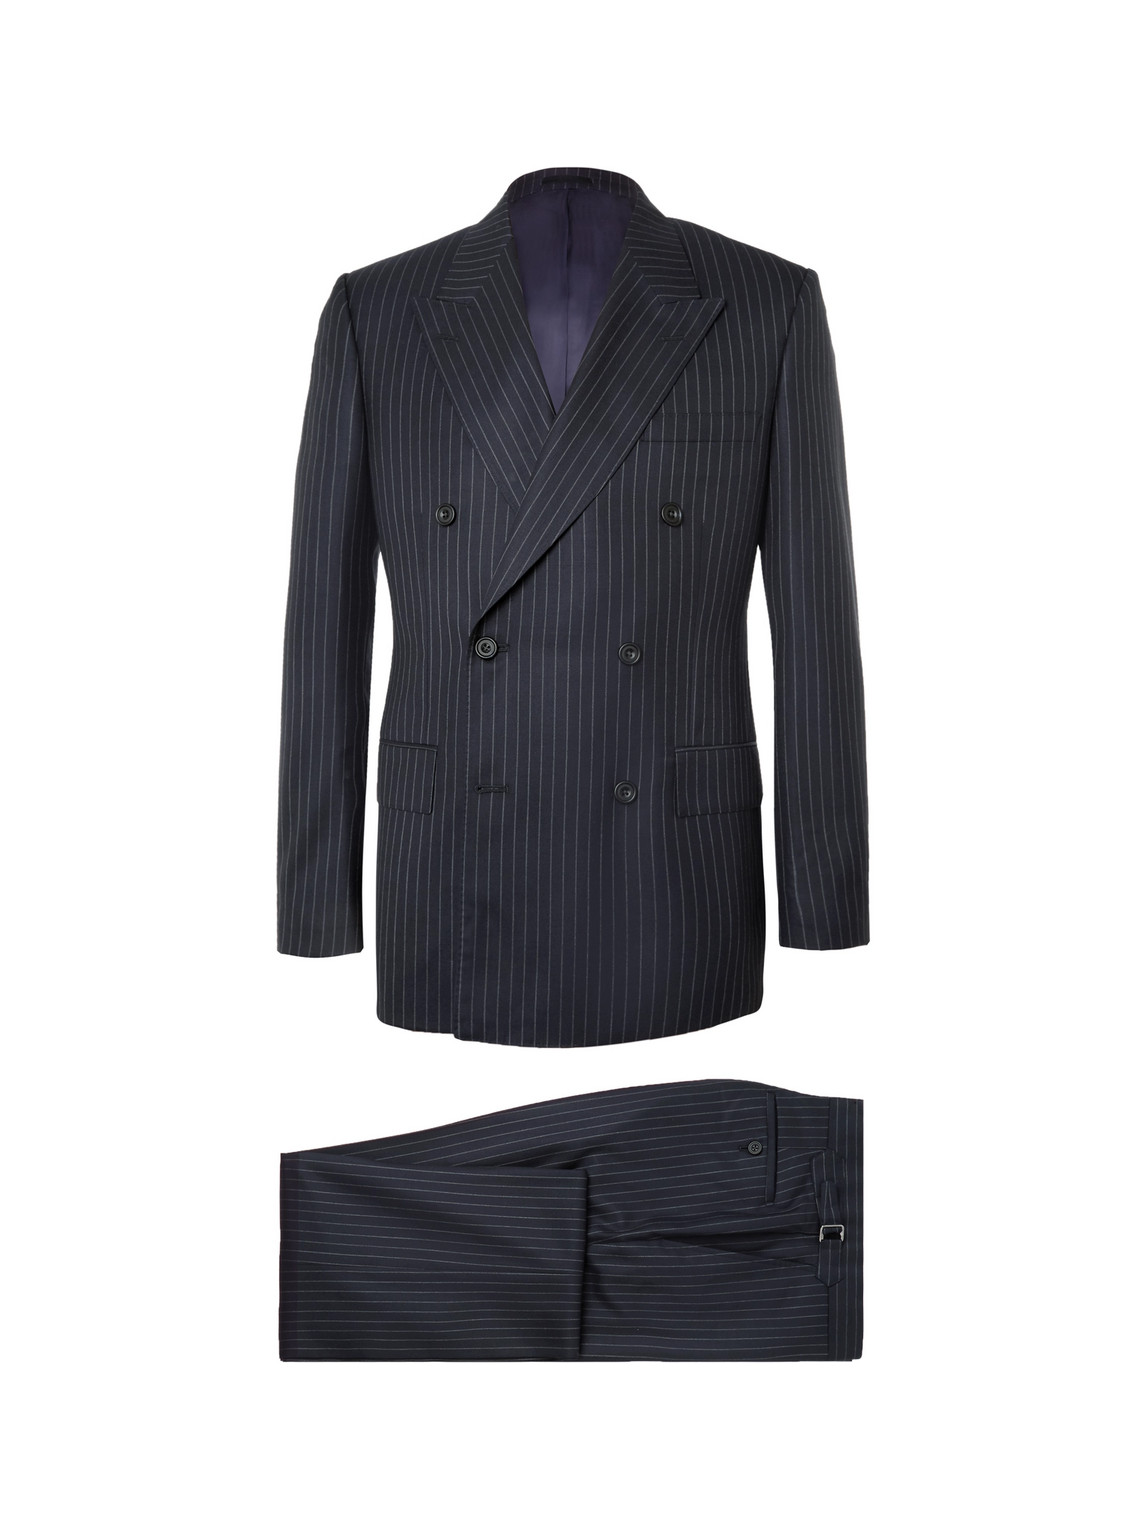 Harry's Navy Pinstriped Super 120s Wool Suit